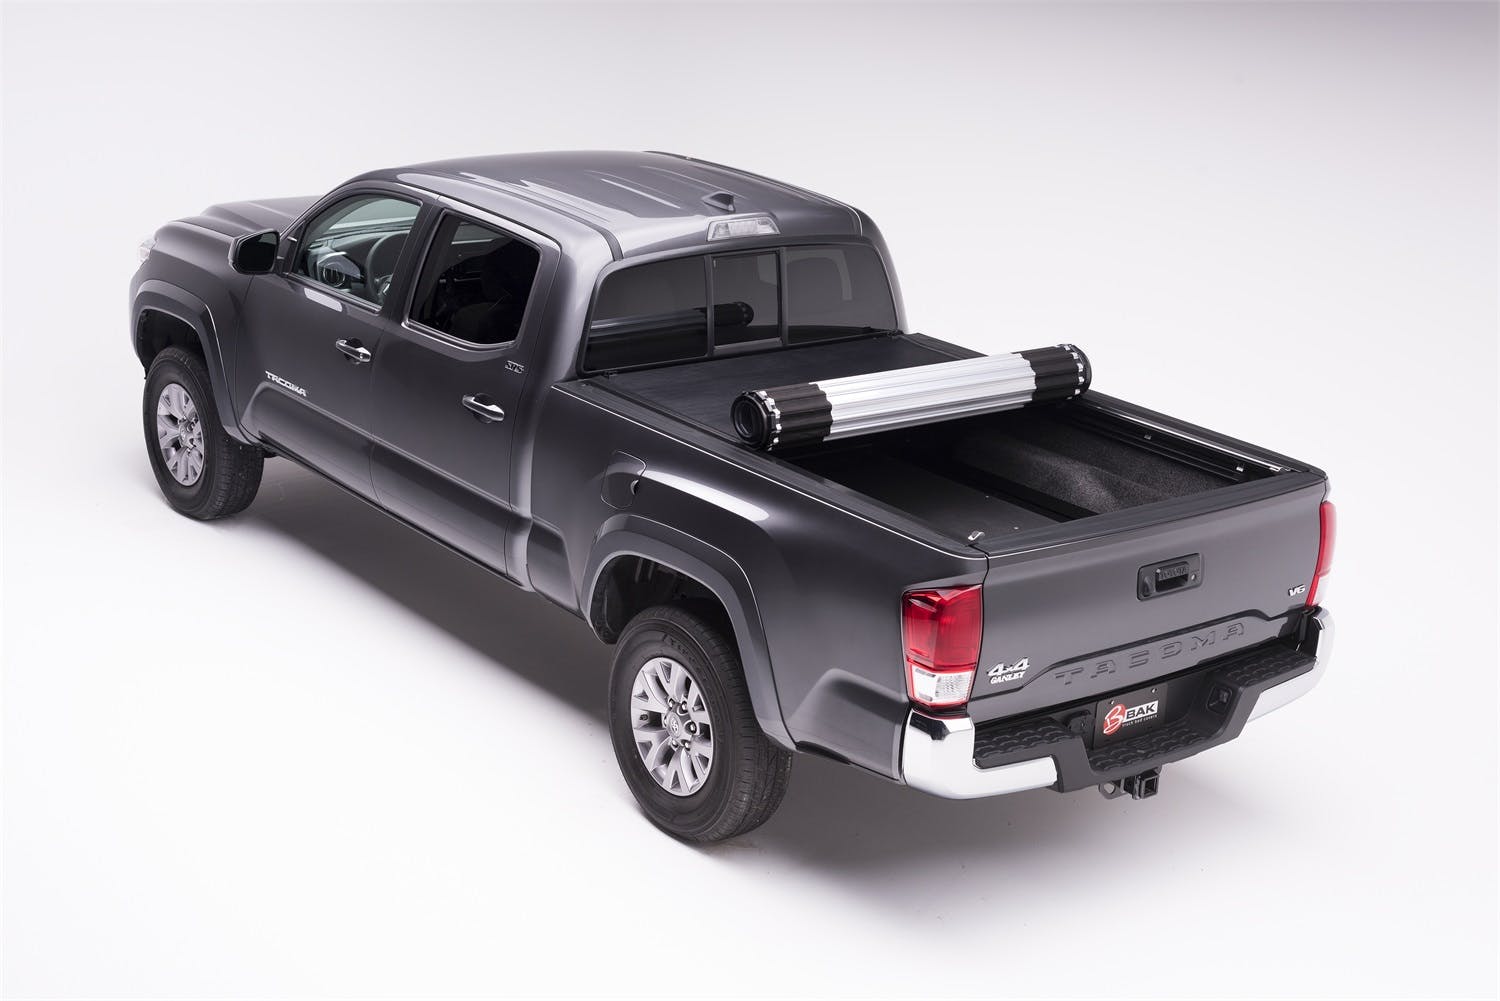 BAK Industries 39426 Revolver X2 Hard Rolling Truck Bed Cover